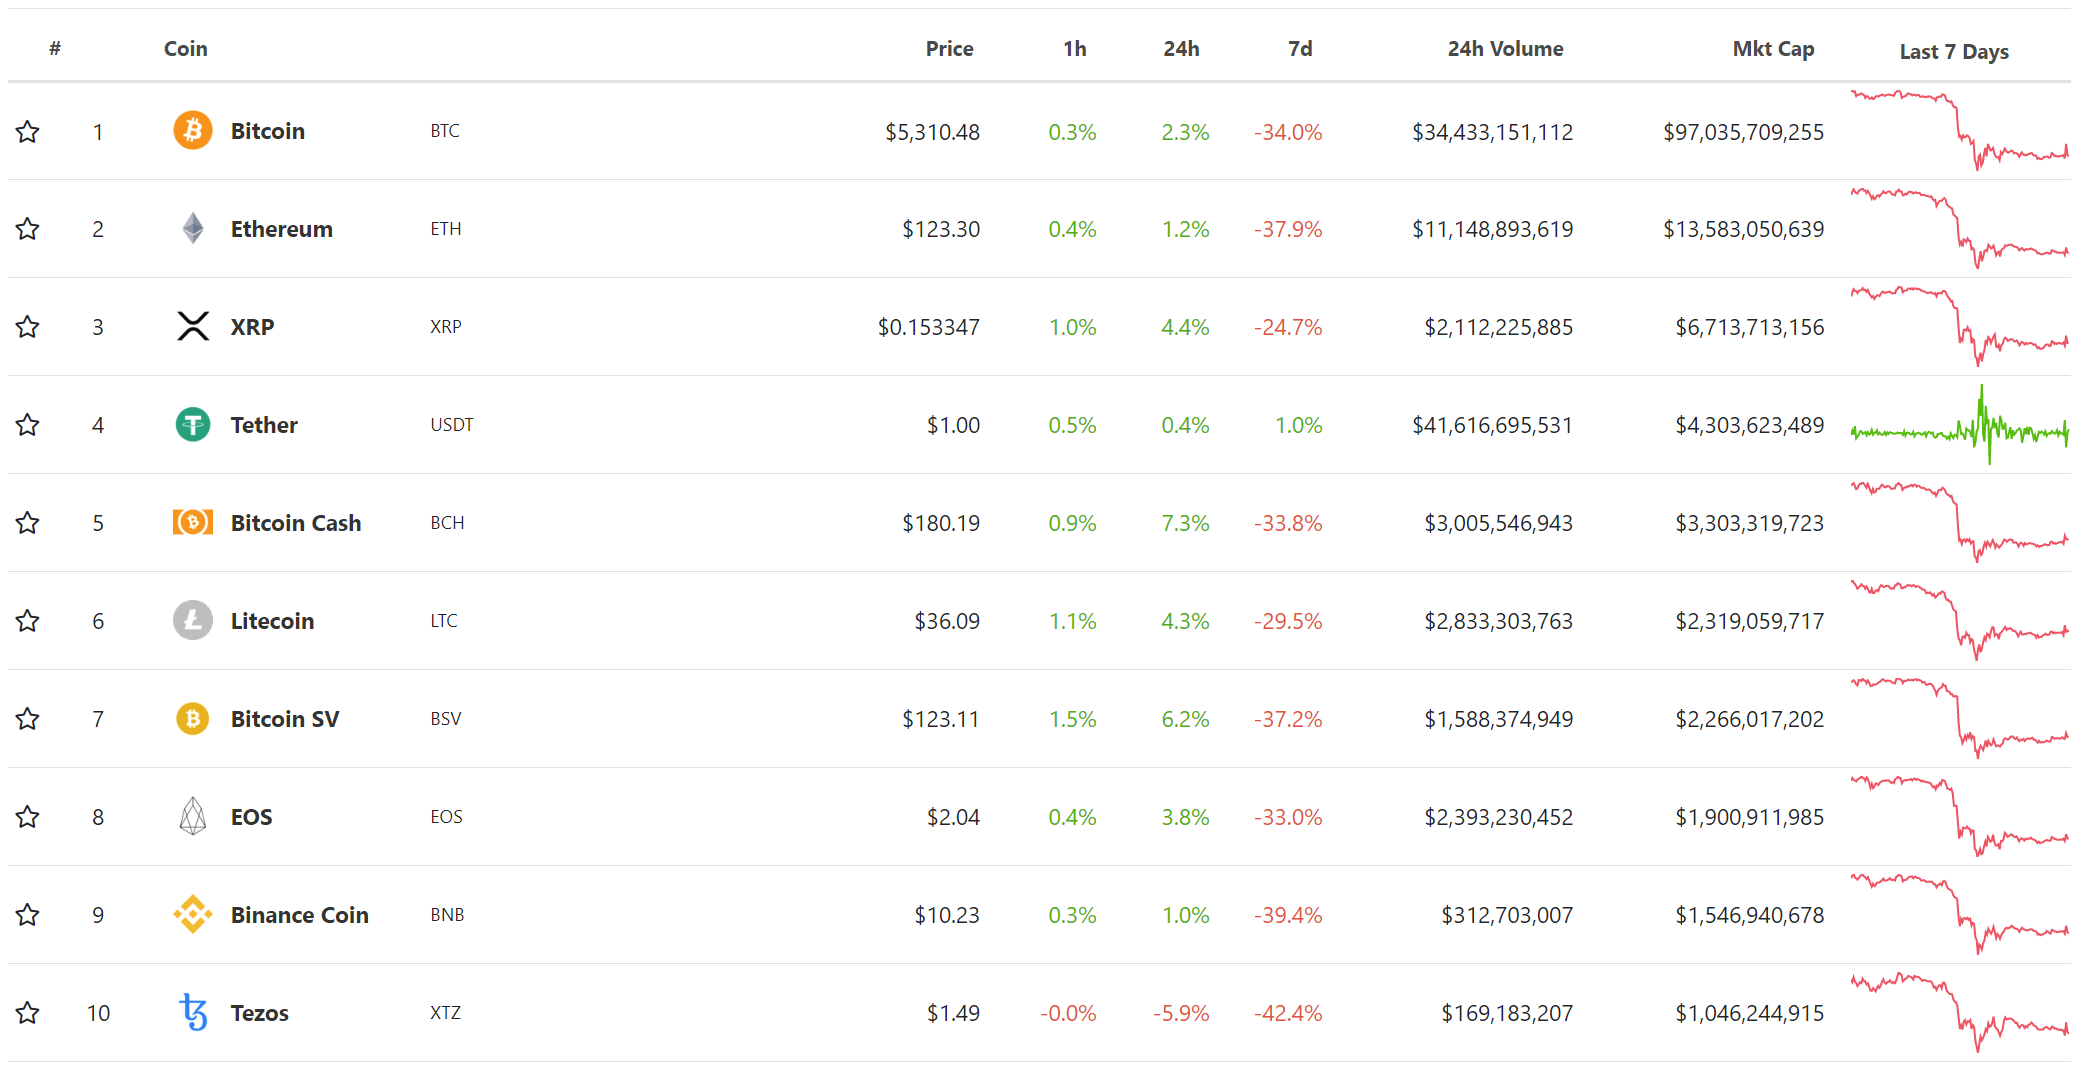 Top 10 cryptocurrencies by market capitalization